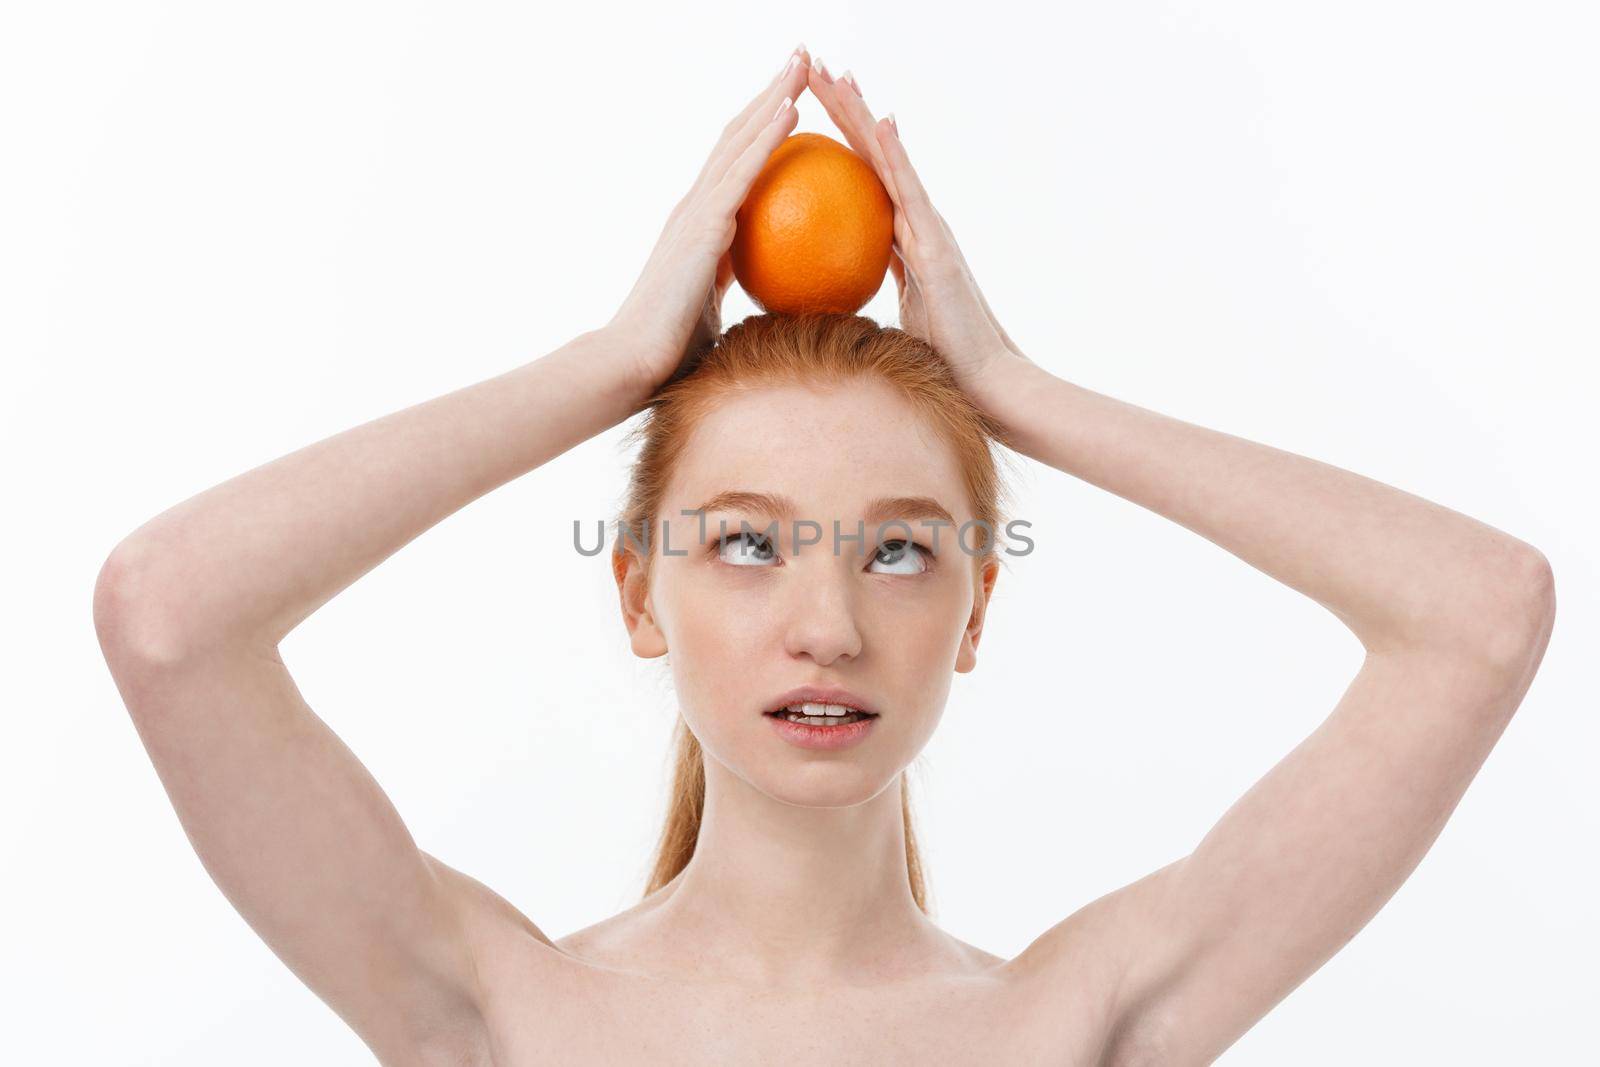 Great food for a healthy lifestyle. Beautiful young shirtless woman holding piece of orange standing against white background